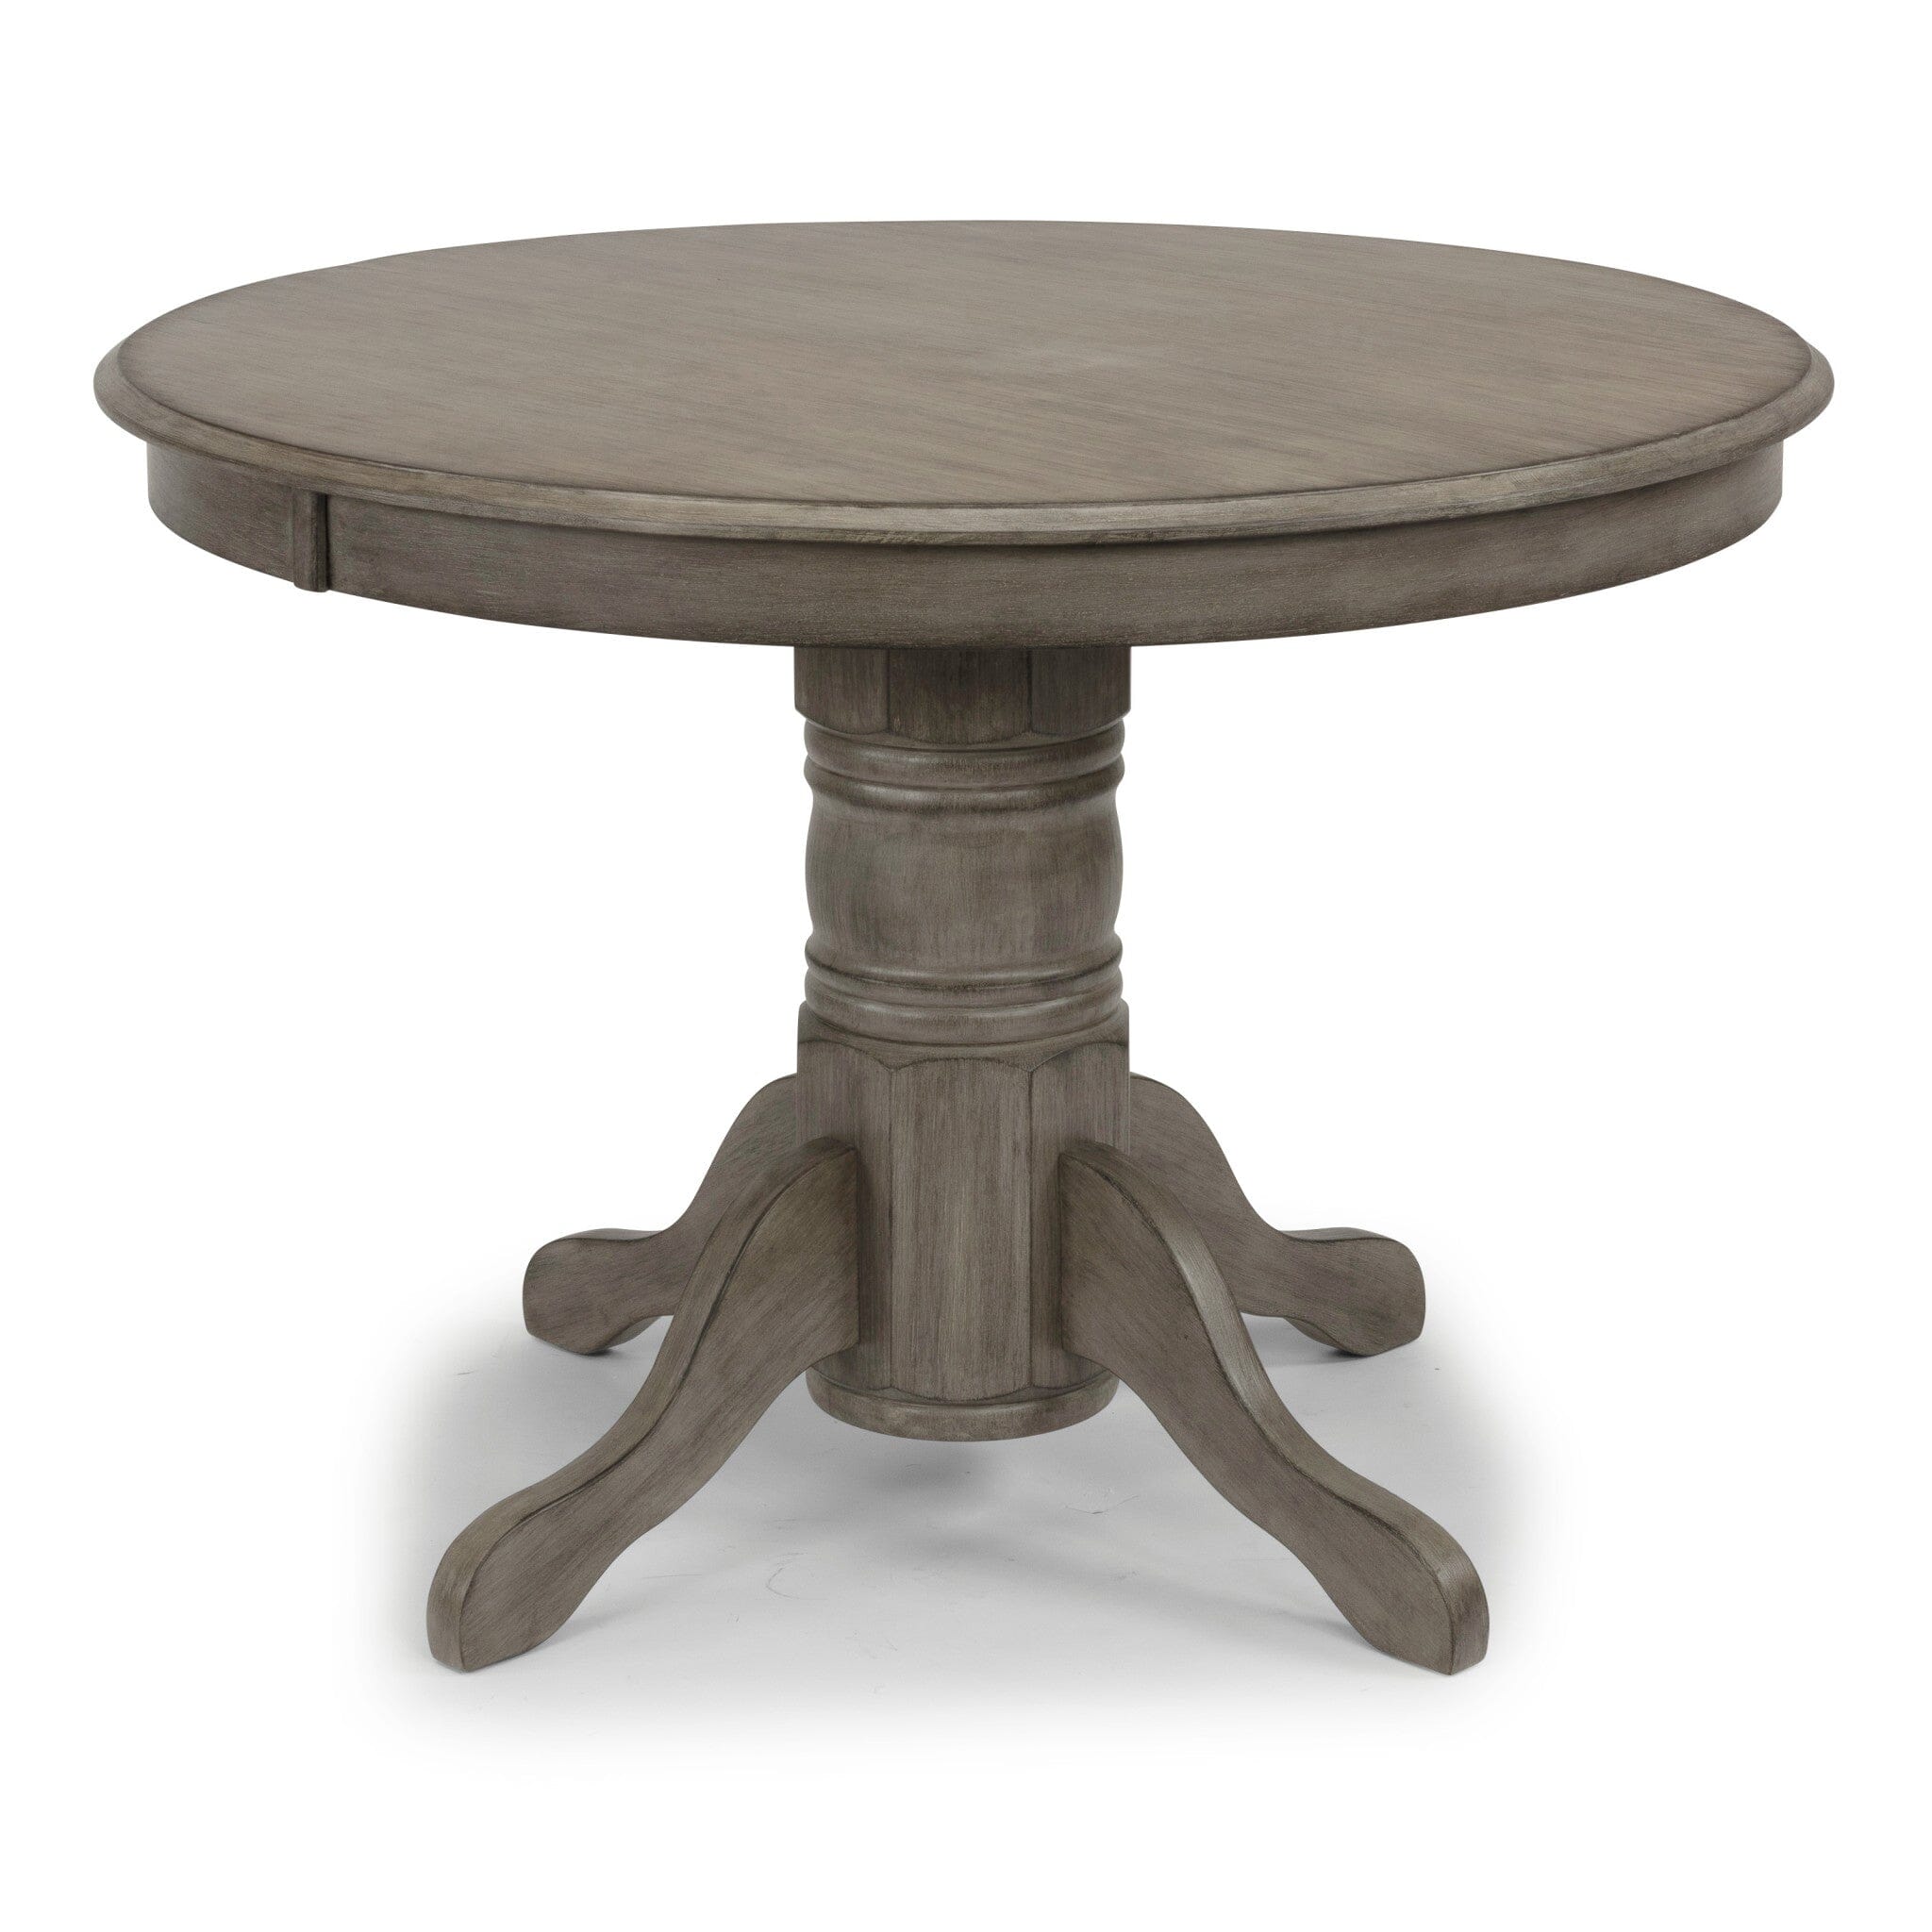 Rustic Farmhouse Dining Table By Mountain Lodge Dining Table Mountain Lodge